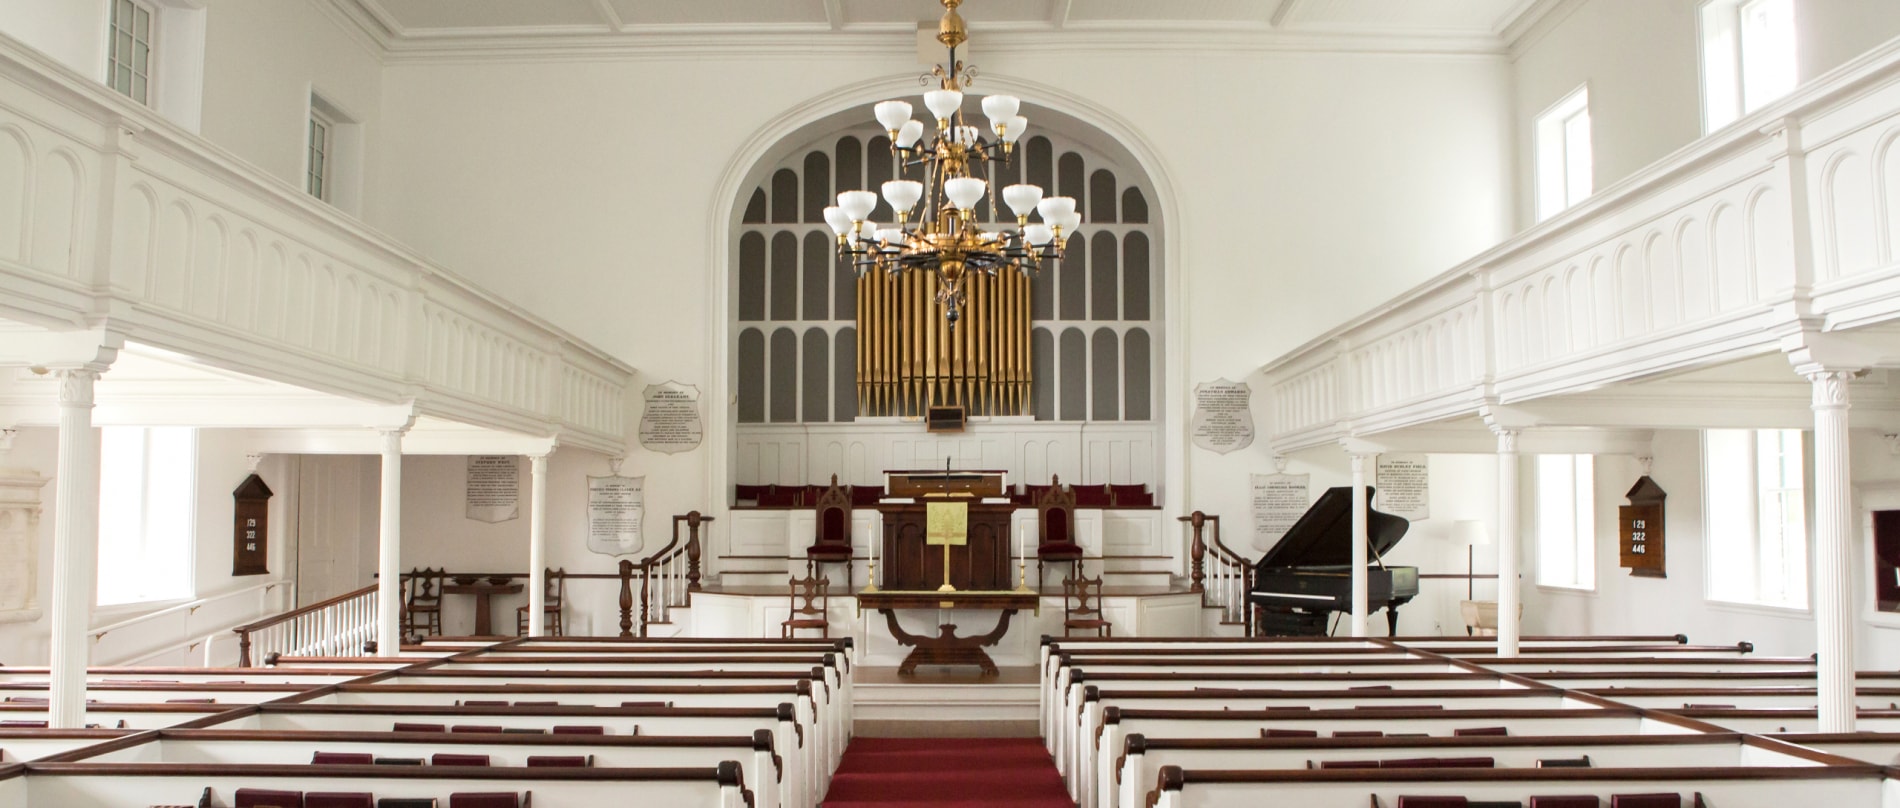 The historic sanctuary of the Stockbridge Congregational Church with white interior and red upholstry.